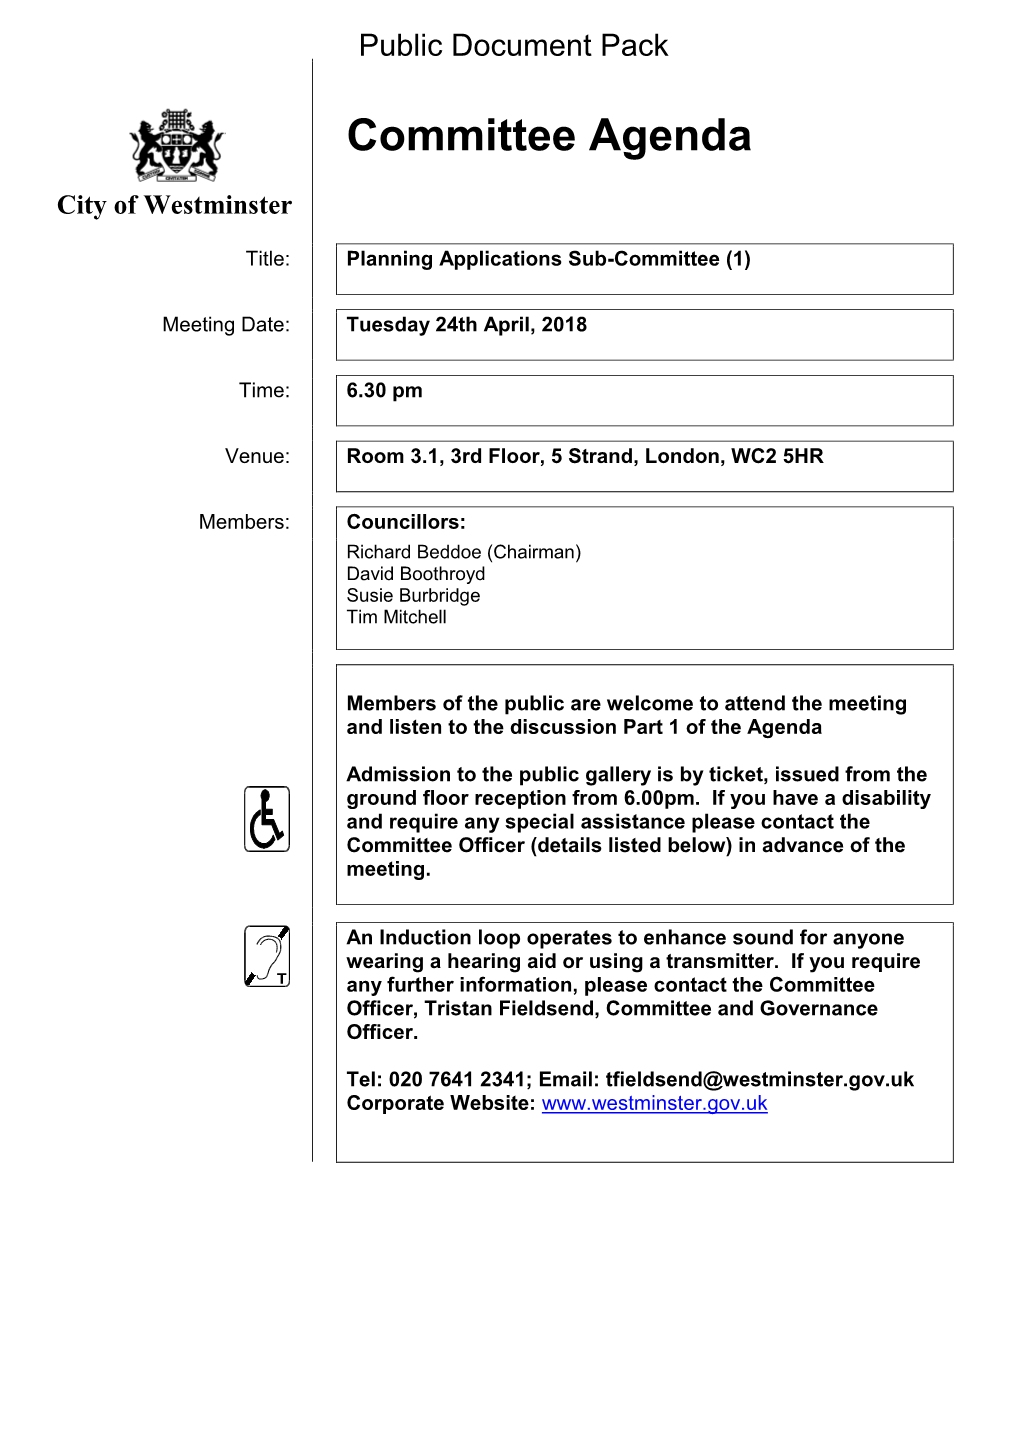 Agenda Document for Planning Applications Sub-Committee